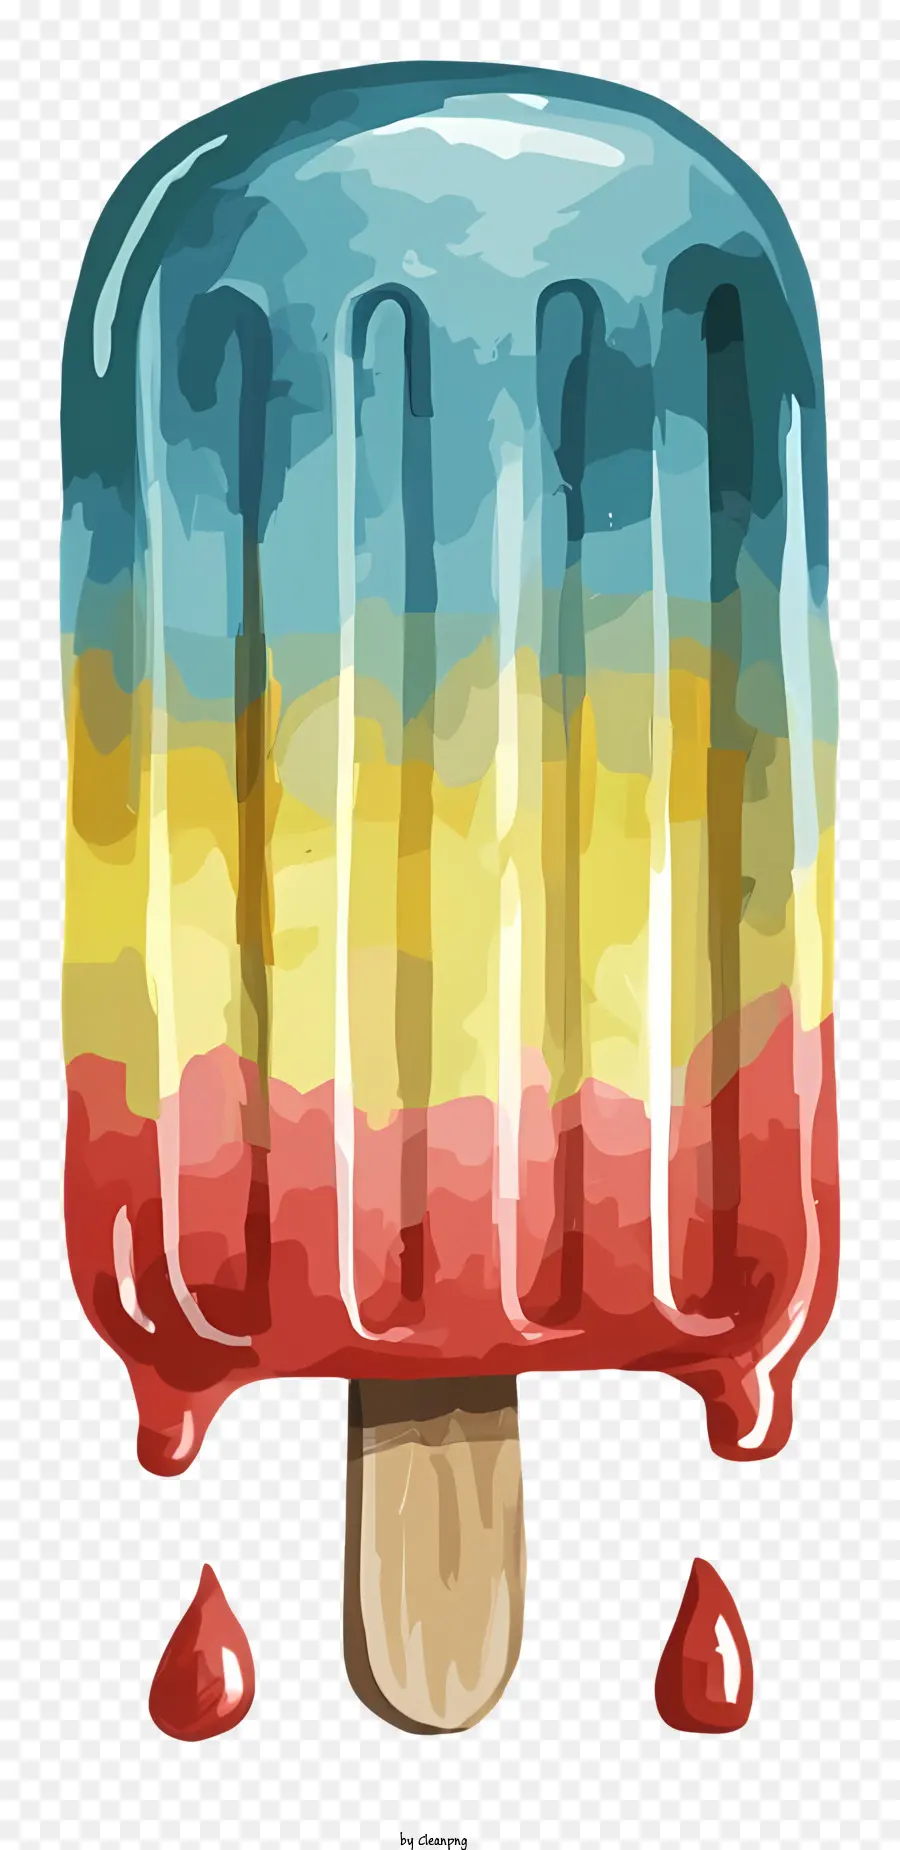 ice cream cone colorful red blue yellow drippings